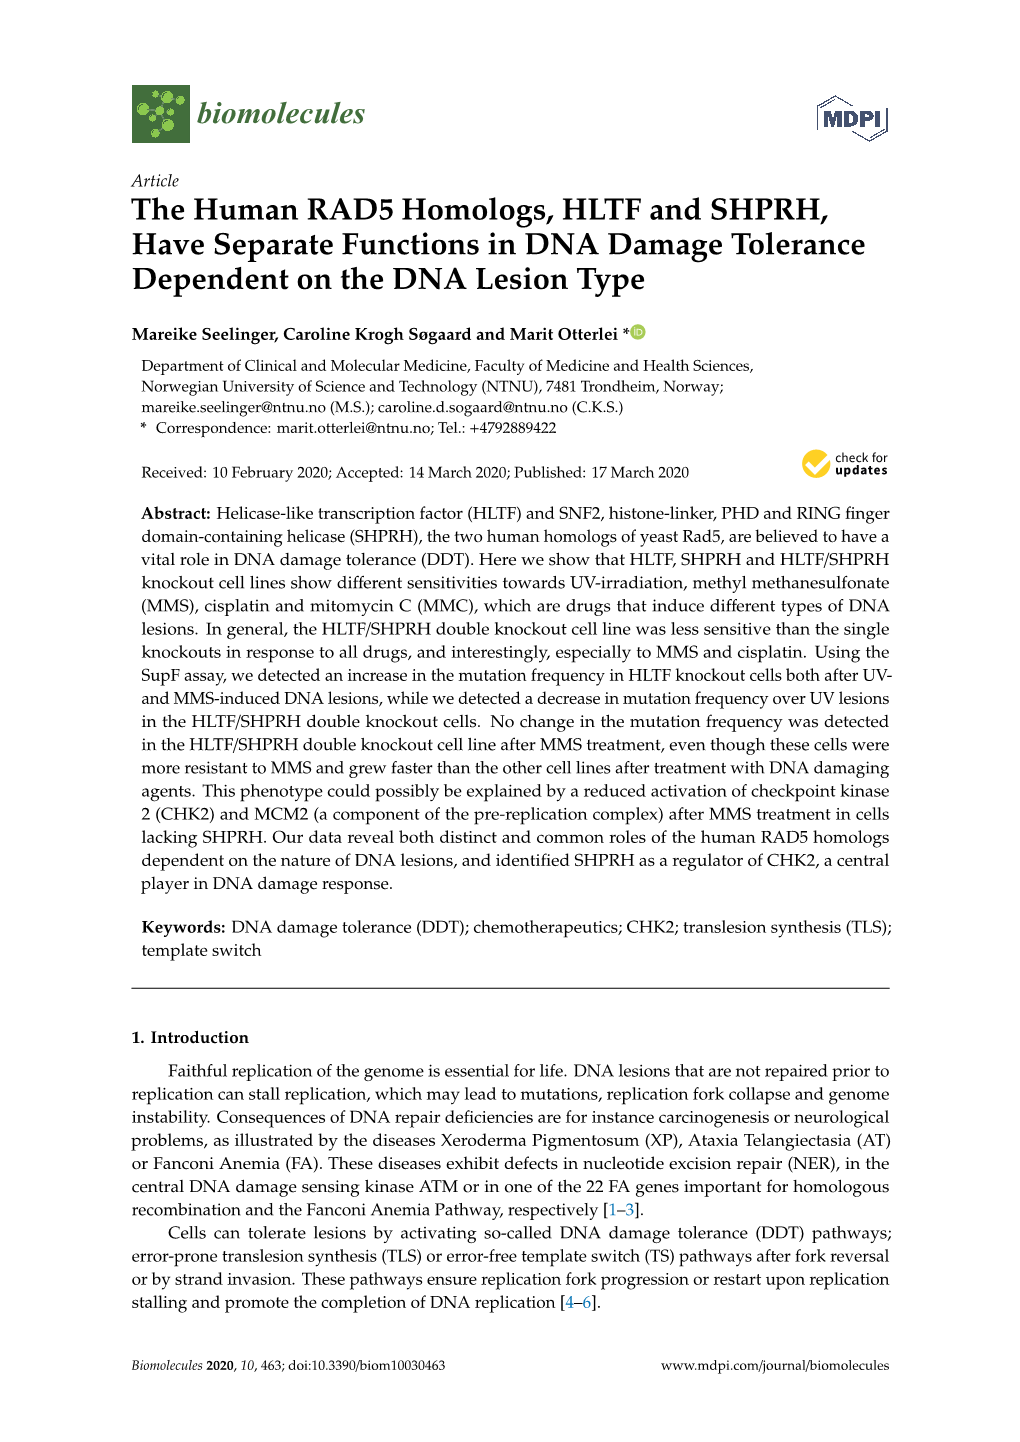 The Human RAD5 Homologs, HLTF and SHPRH, Have Separate Functions in DNA Damage Tolerance Dependent on the DNA Lesion Type